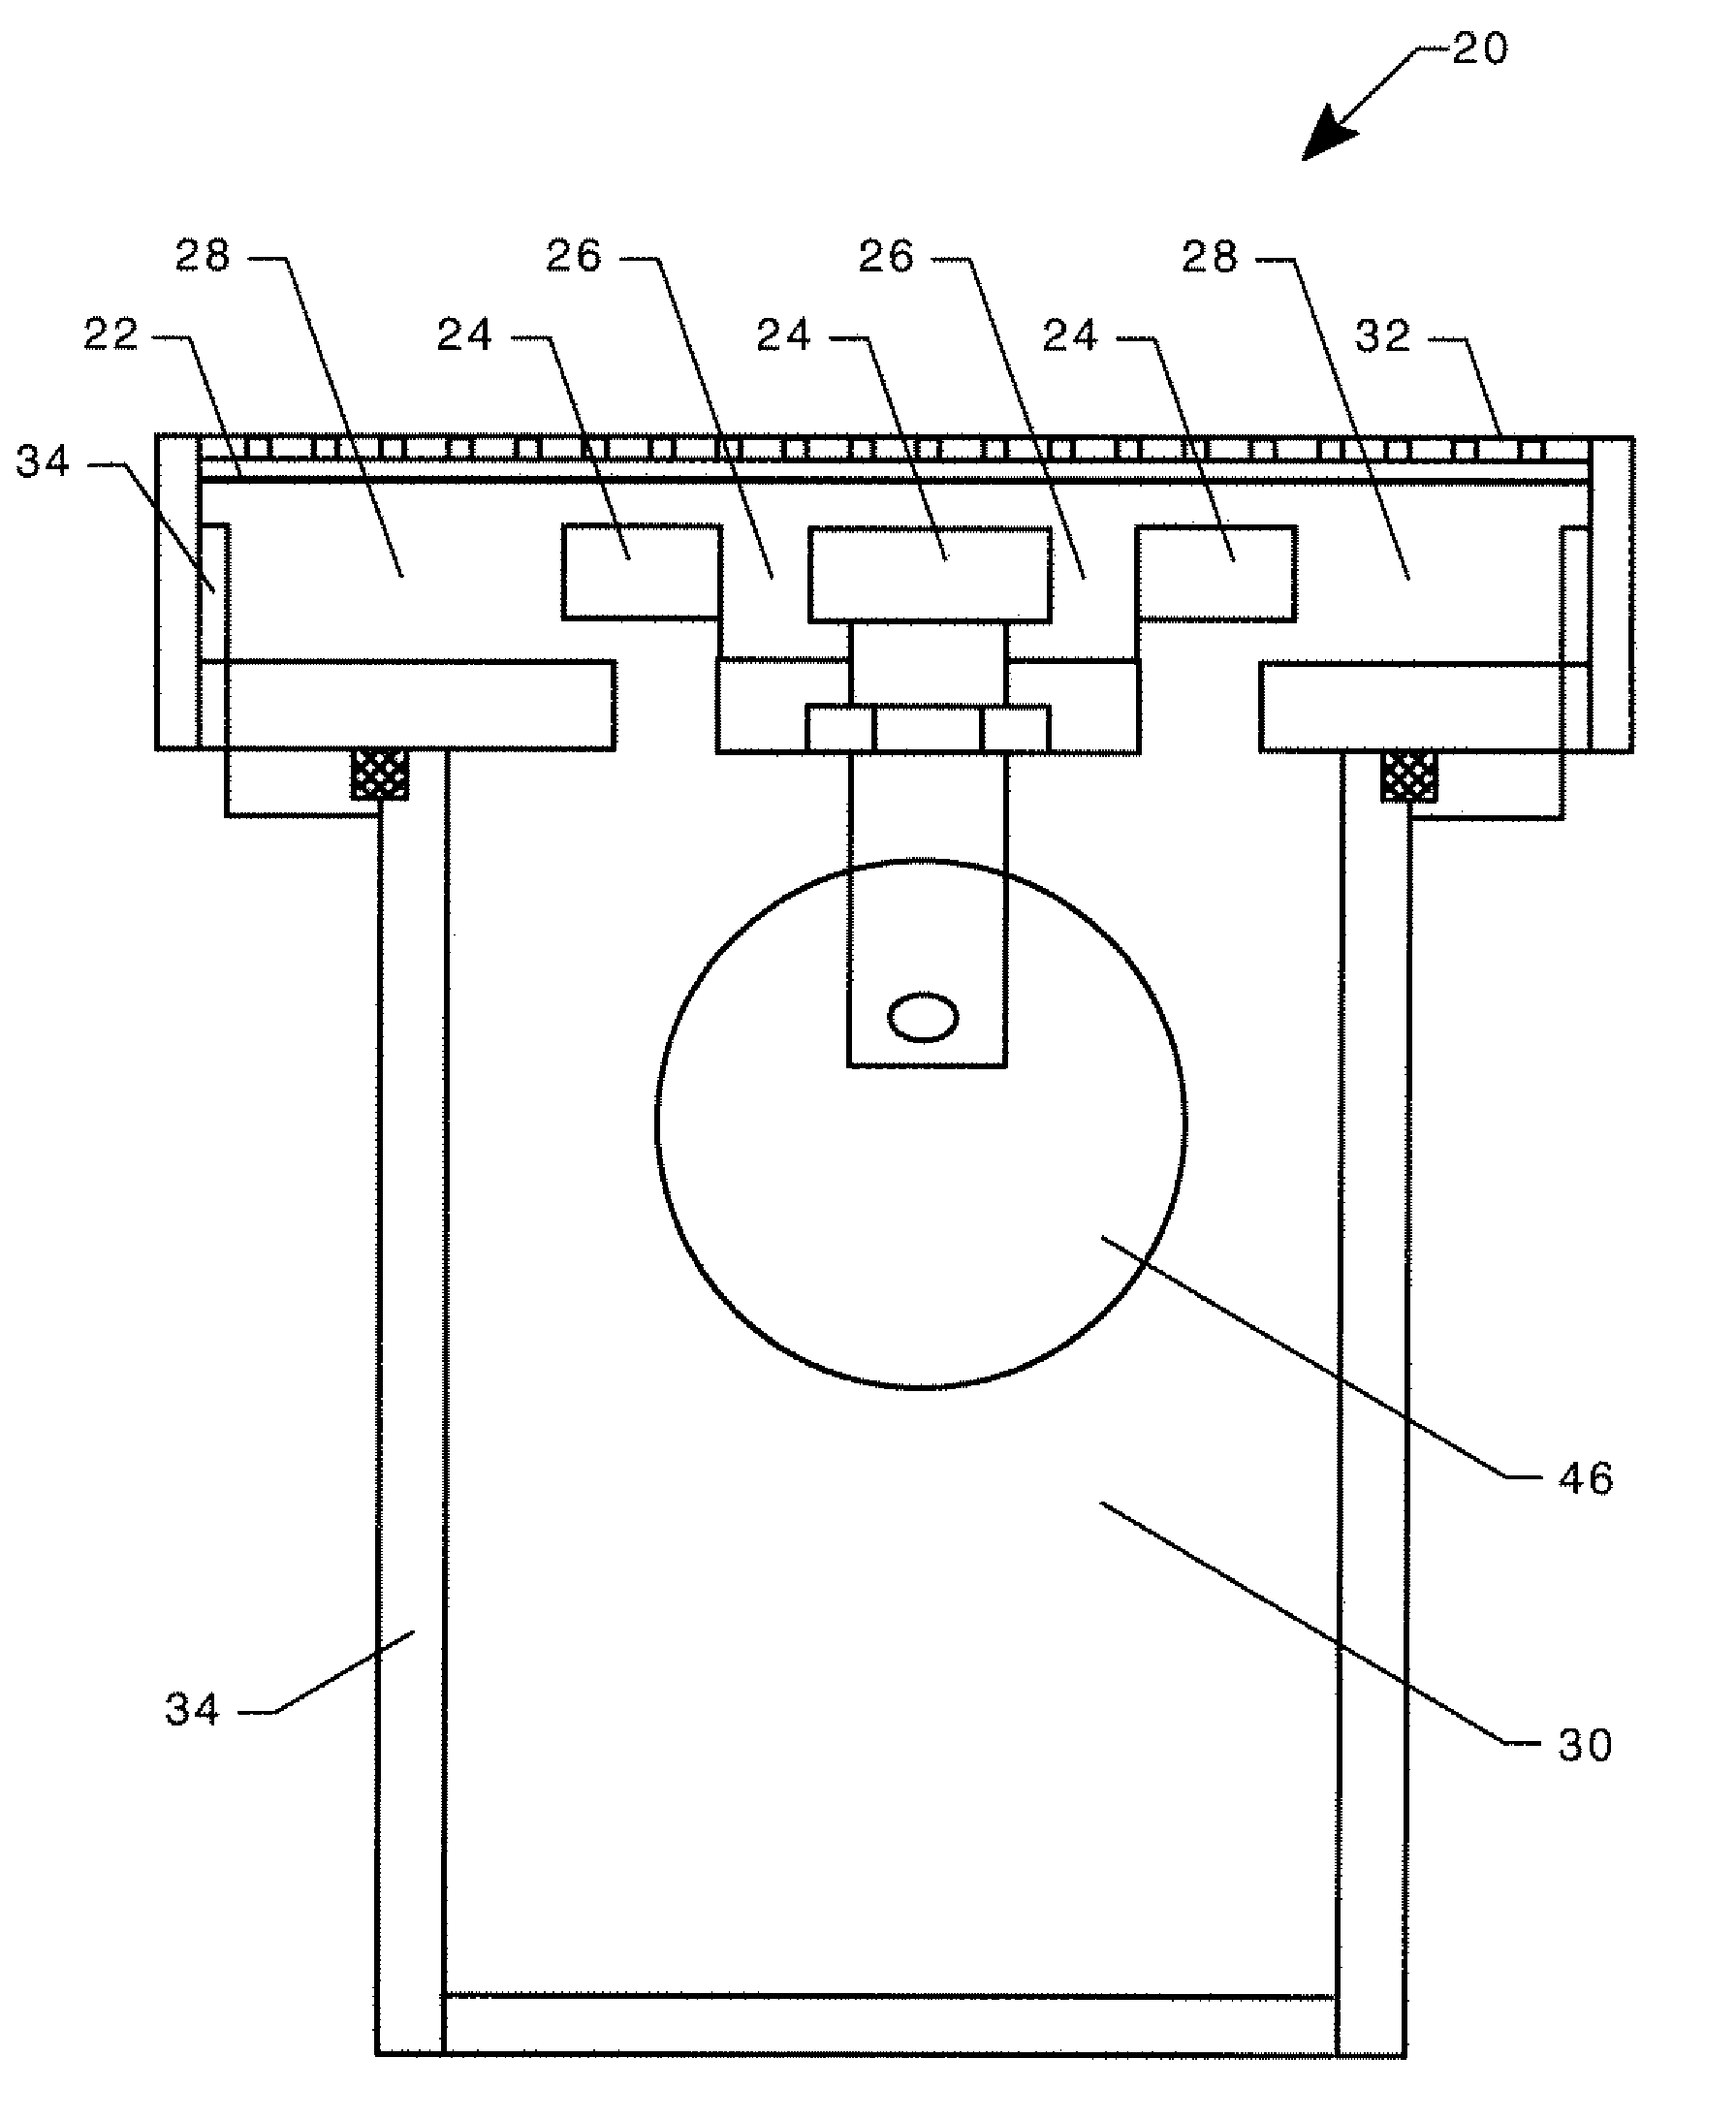 Extreme Low Frequency Acoustic Measurement System